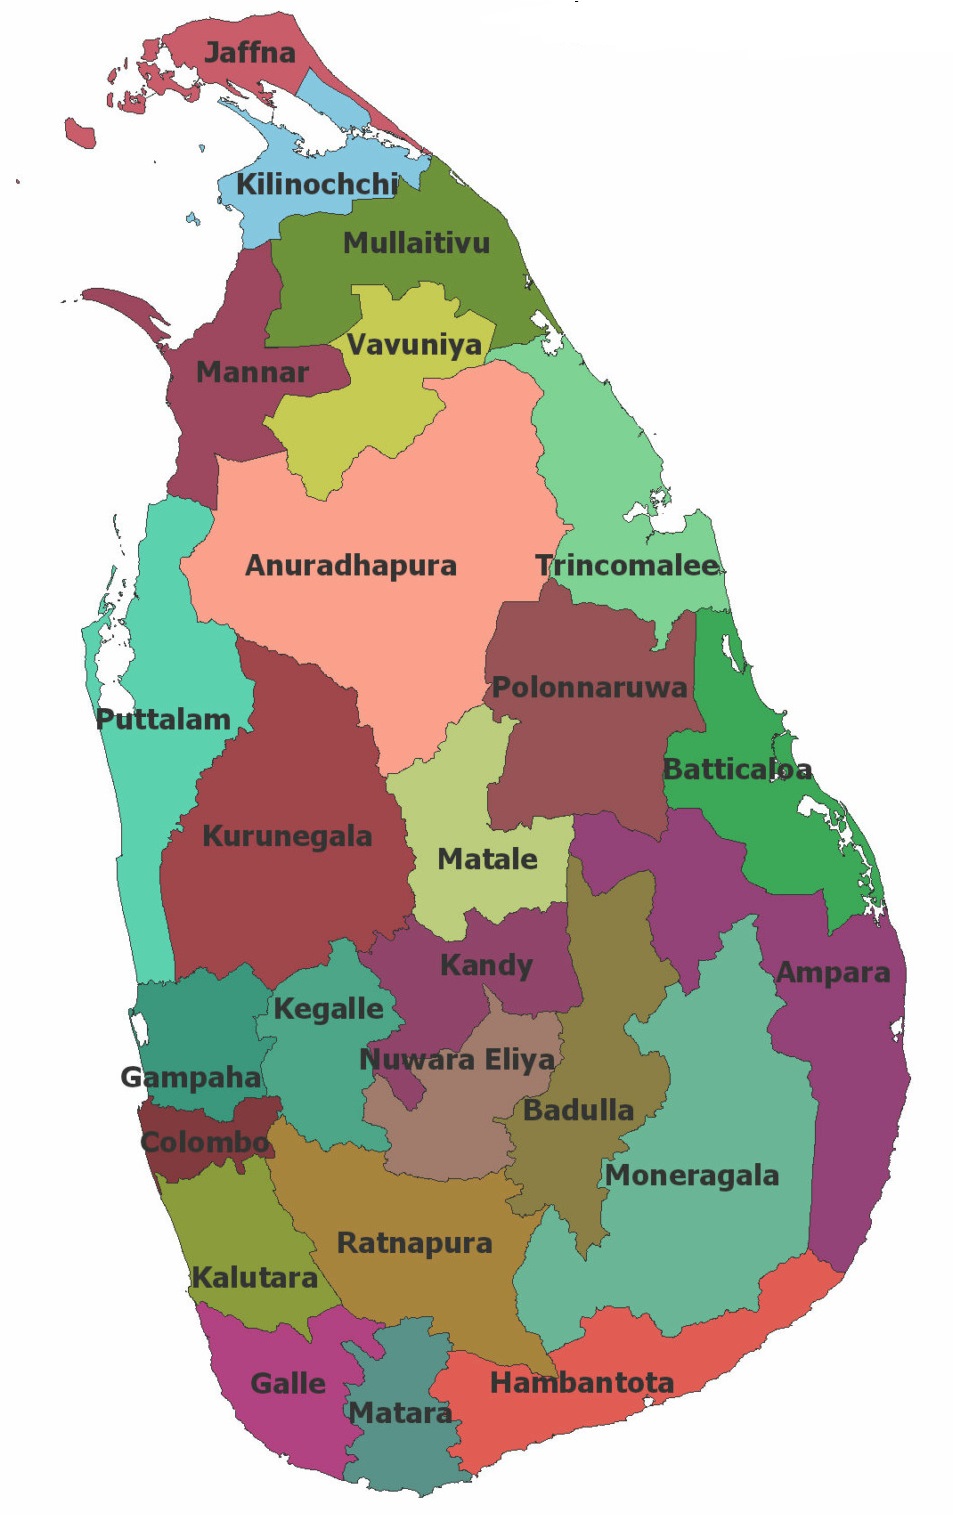 WBBSE Notes For Class 8 Geography Chapter 8 Some Neighbouring Countries Of India Map Of Sri Lanka